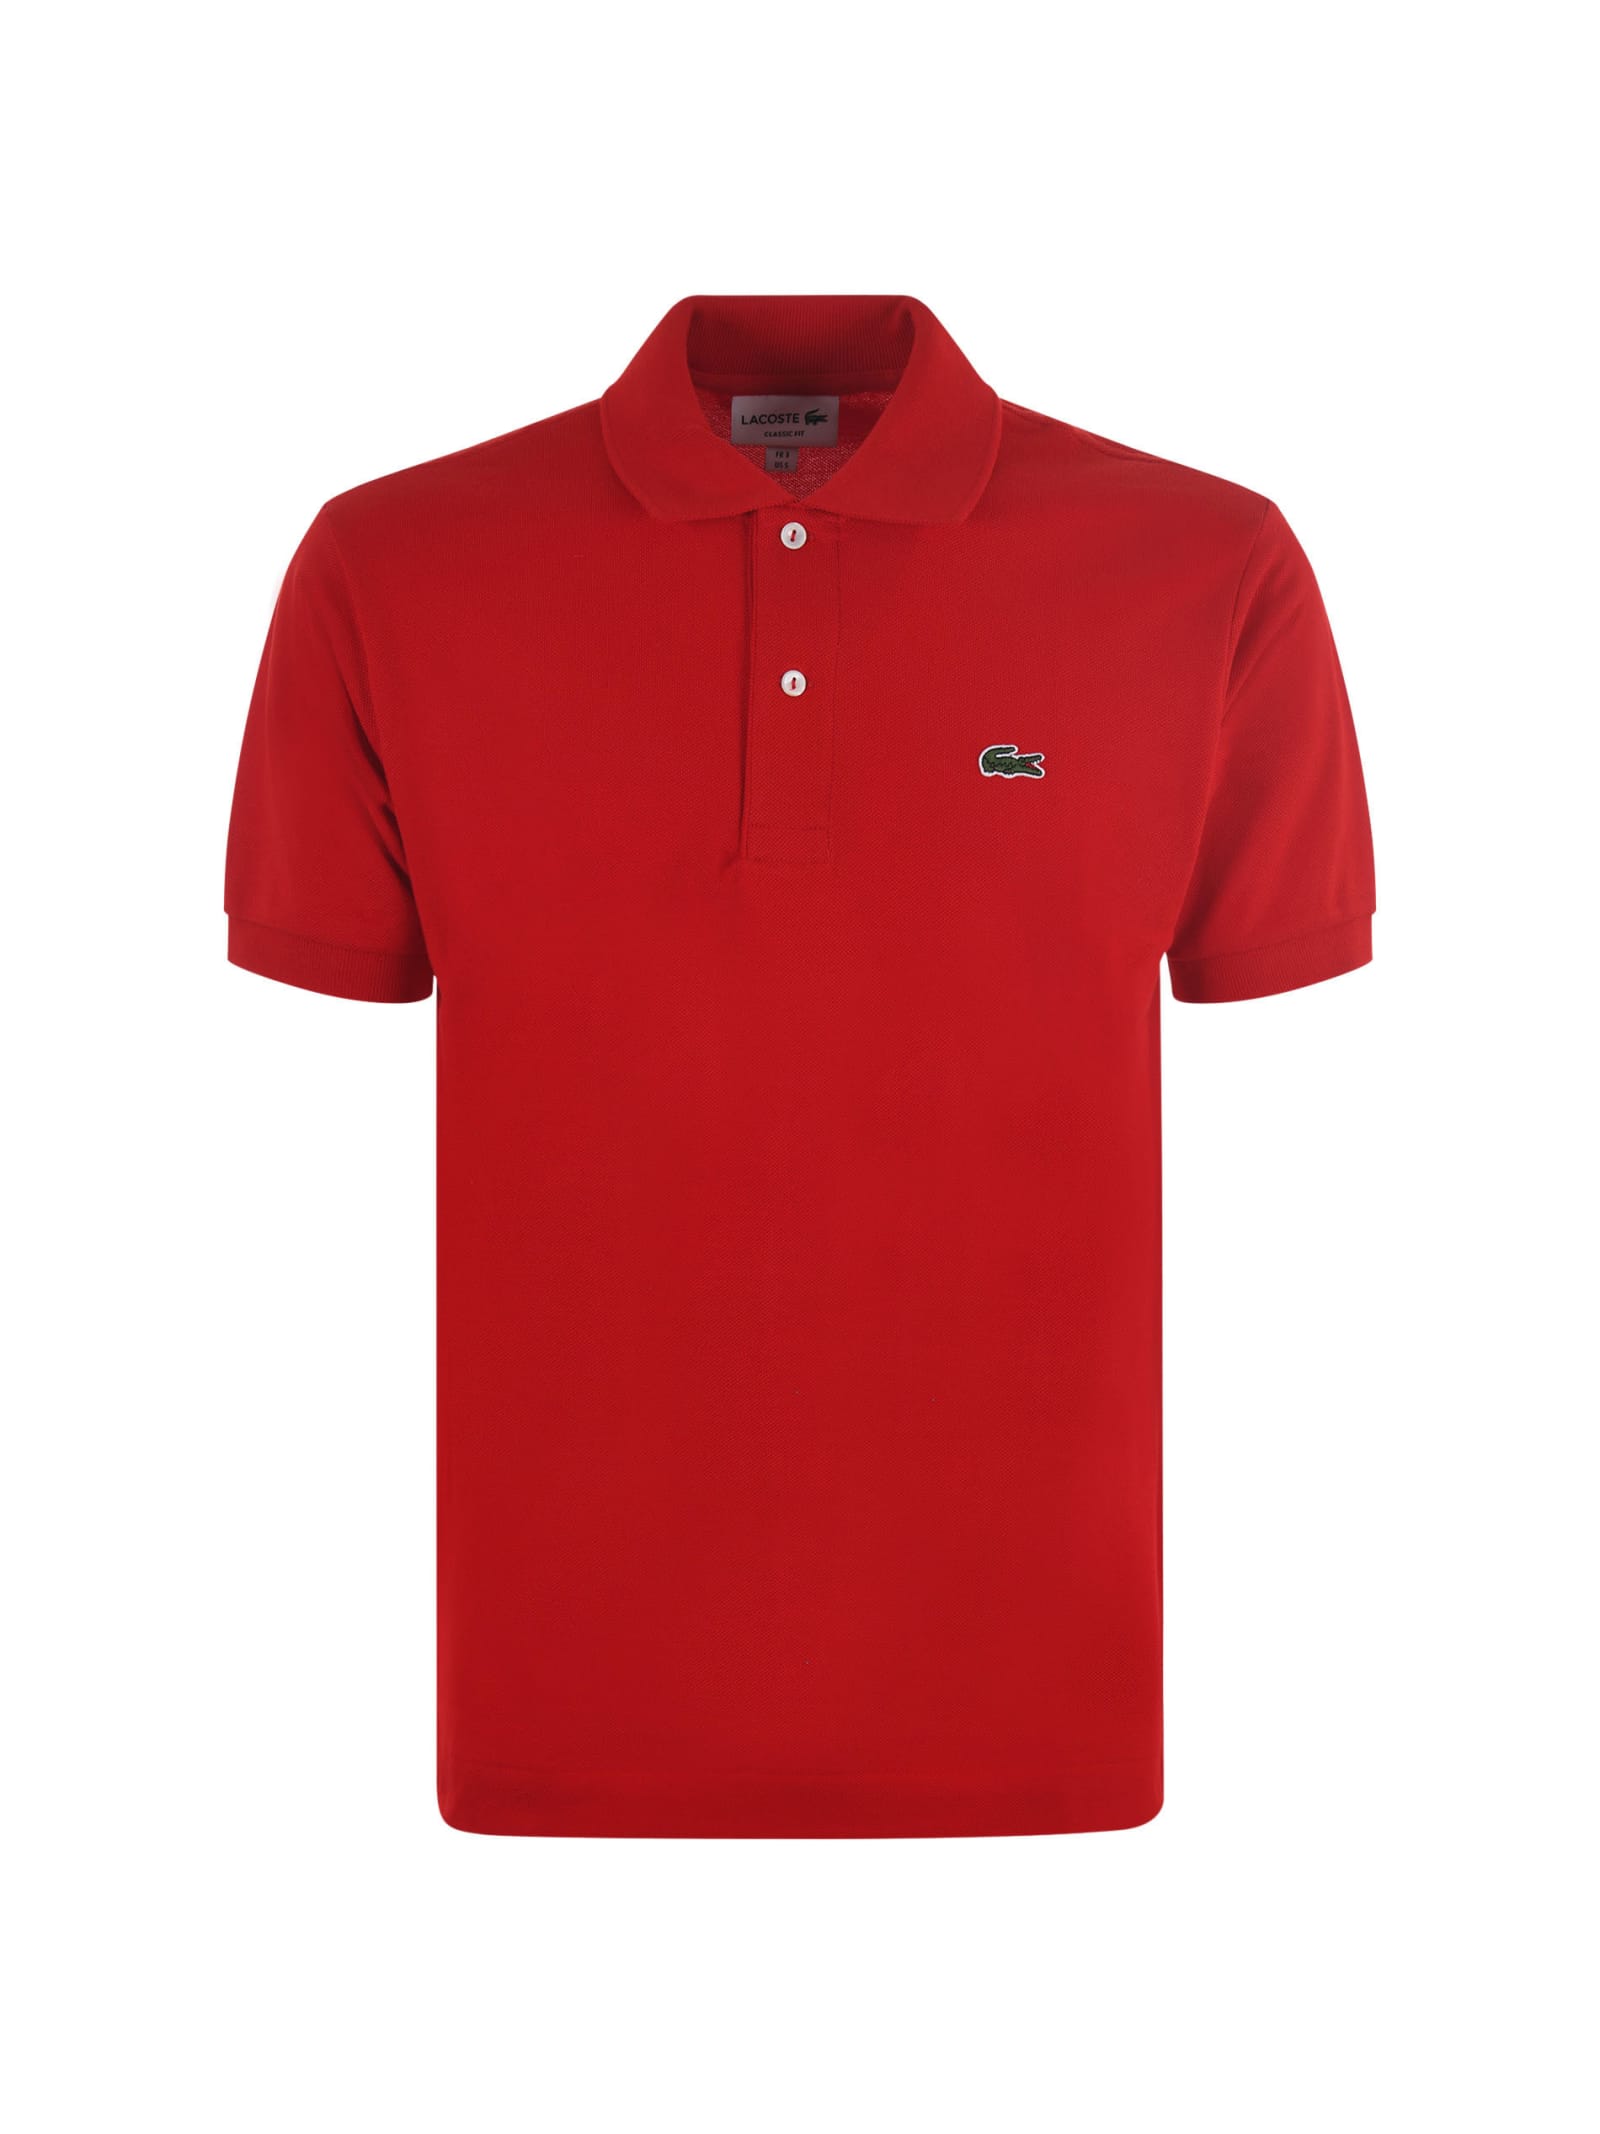 Lacoste Classic Design Polo Shirt Red